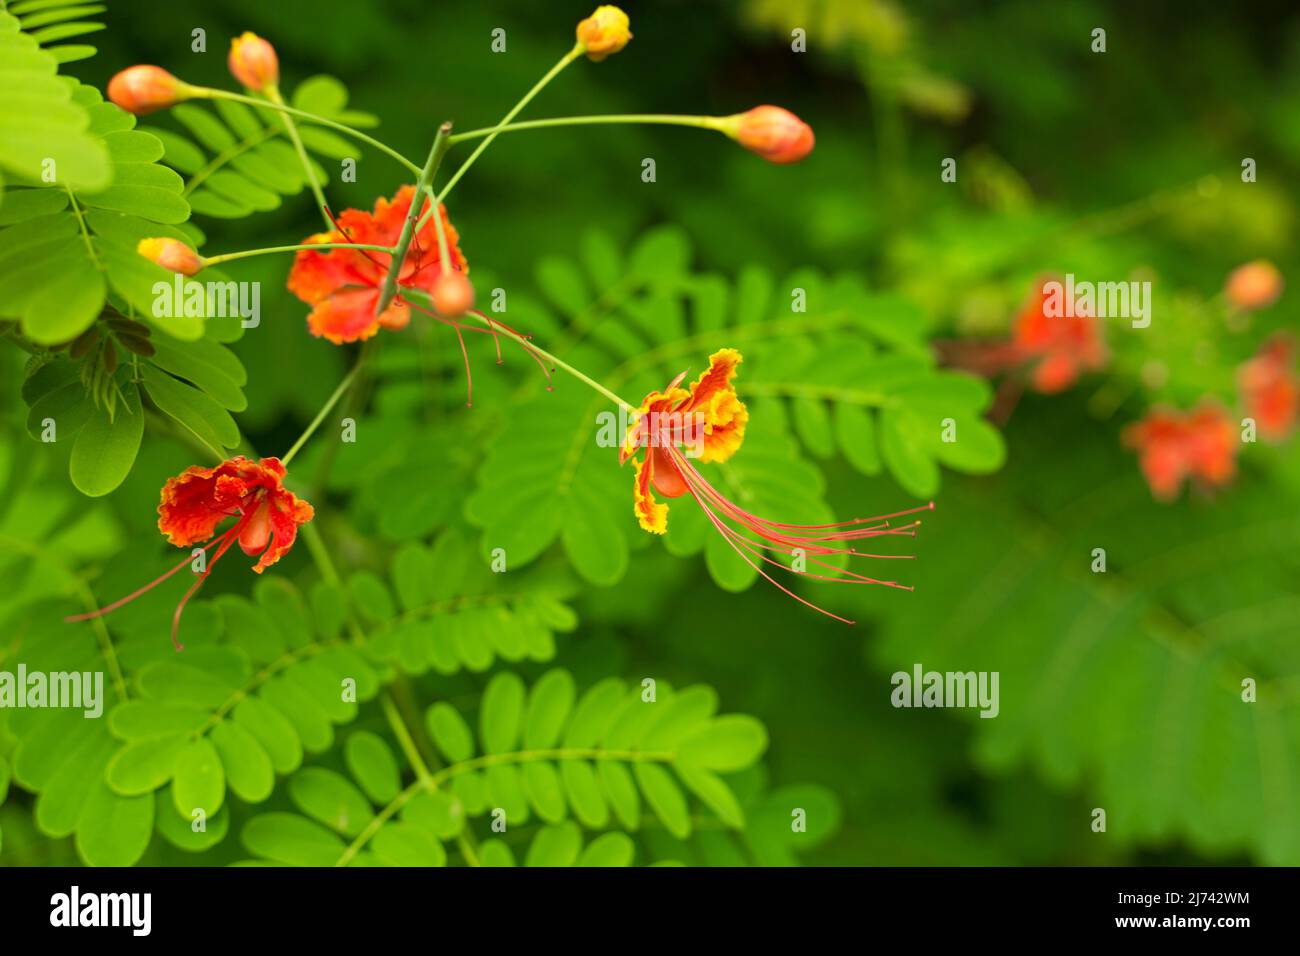 Green leaves and orange flowers of tropic acacia tree. Close up tropic background Stock Photo